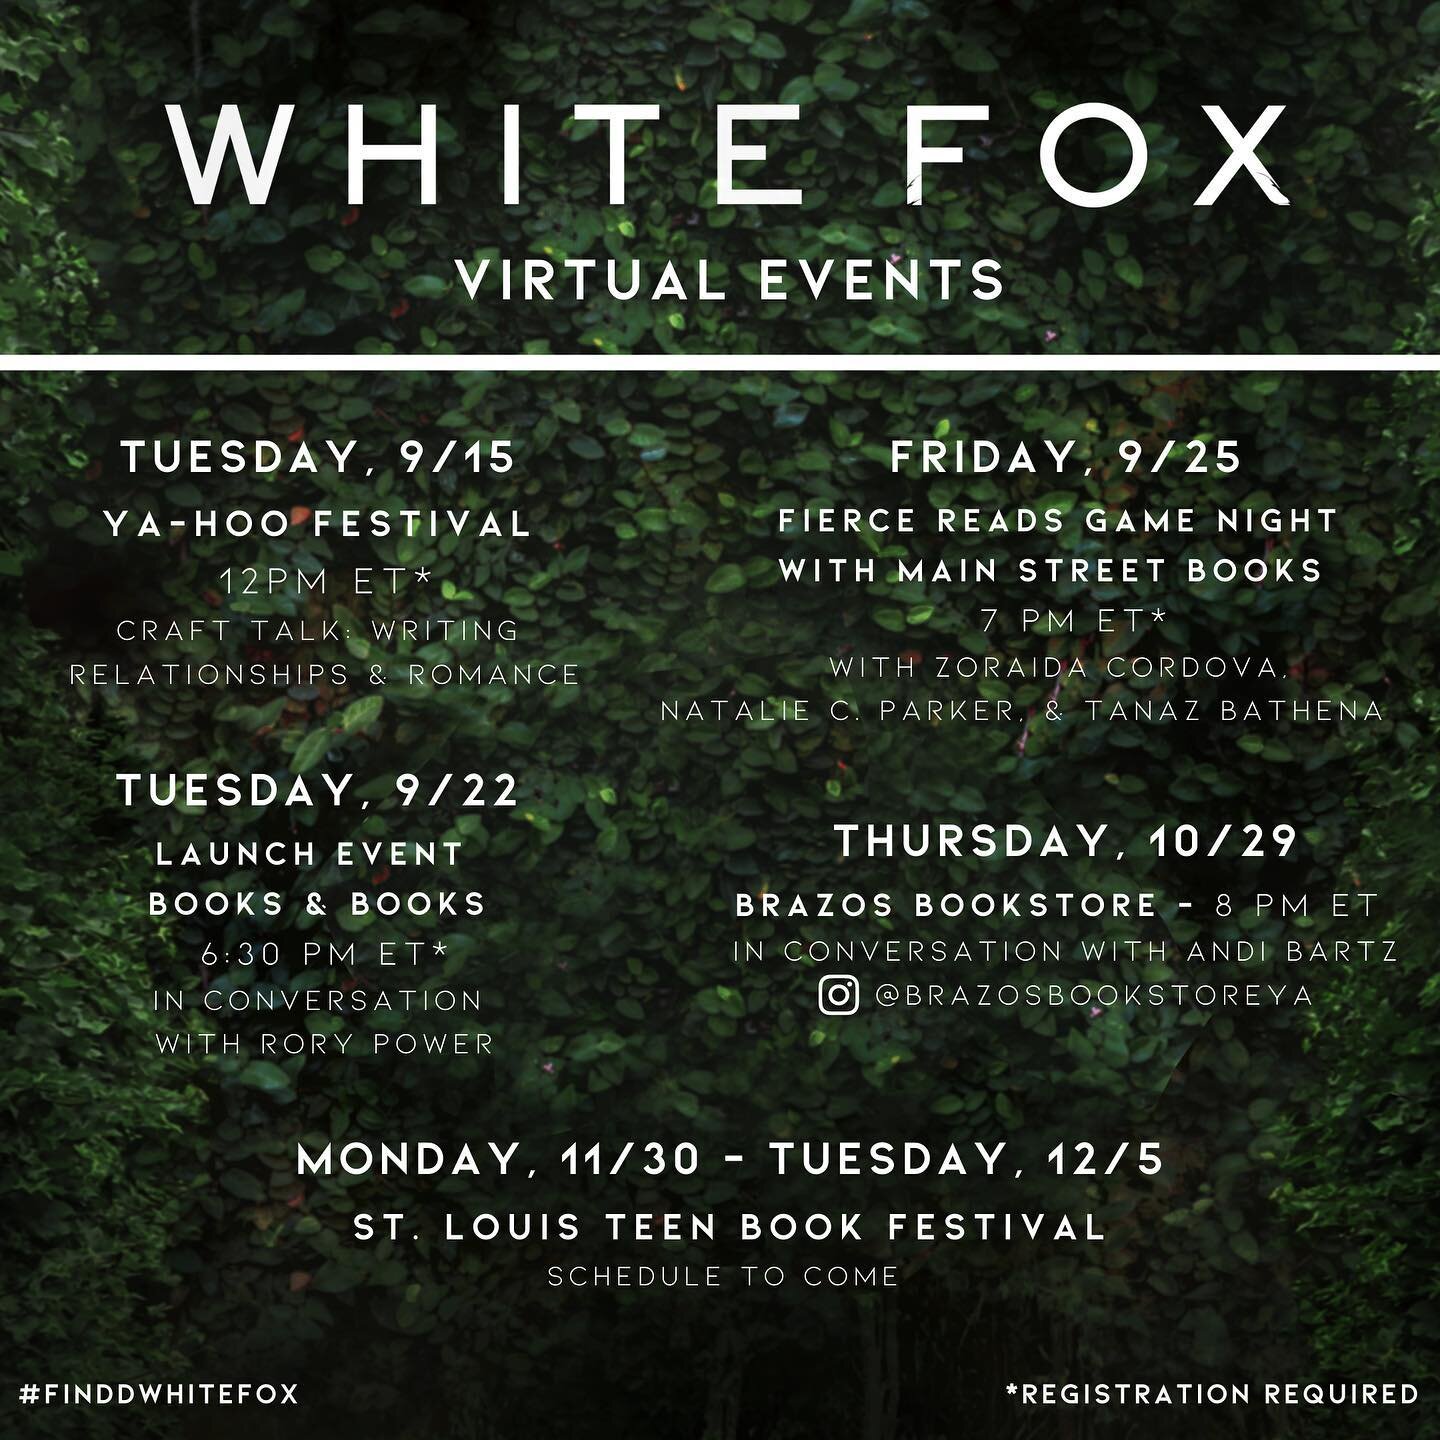 ❗️❗️❗️Thrilled to be celebrating the arrival of White Fox with some of my favorite people this fall. You can expect these chats to be weird and surprising and speckled with wisdom (or at least bad jokes from me&mdash;I've been storing them up since I